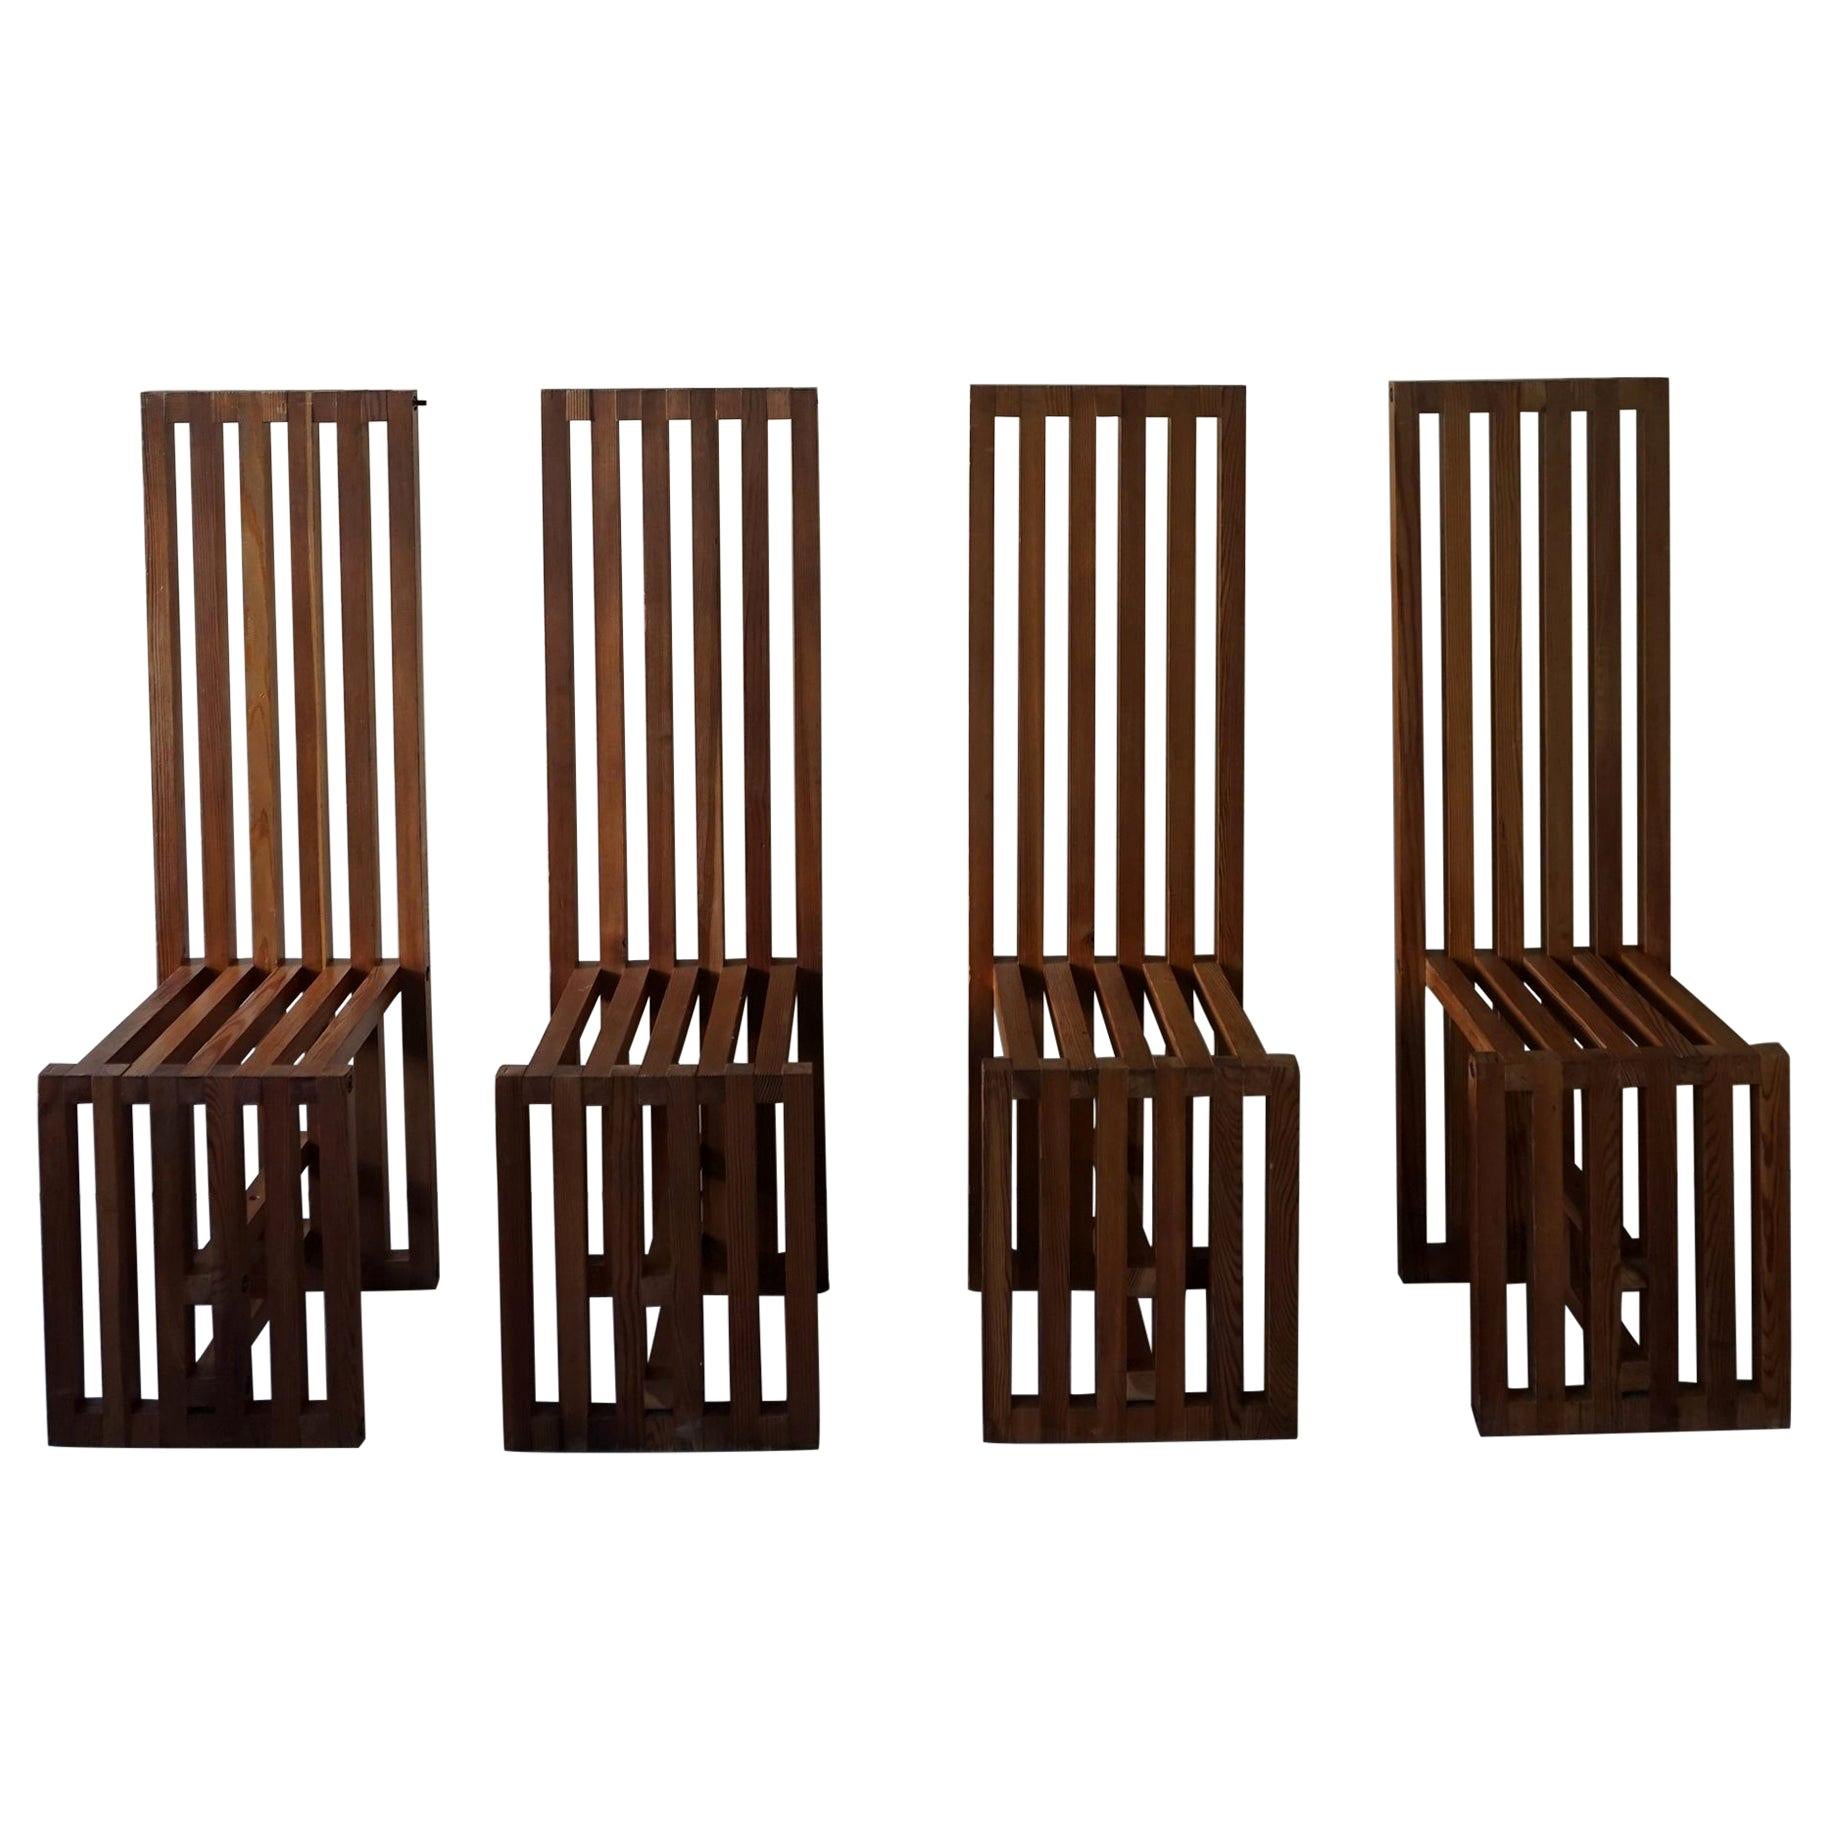 Set of 4 Italian High Back Pine Chairs by Lella & Massimo Vignelli, 1974